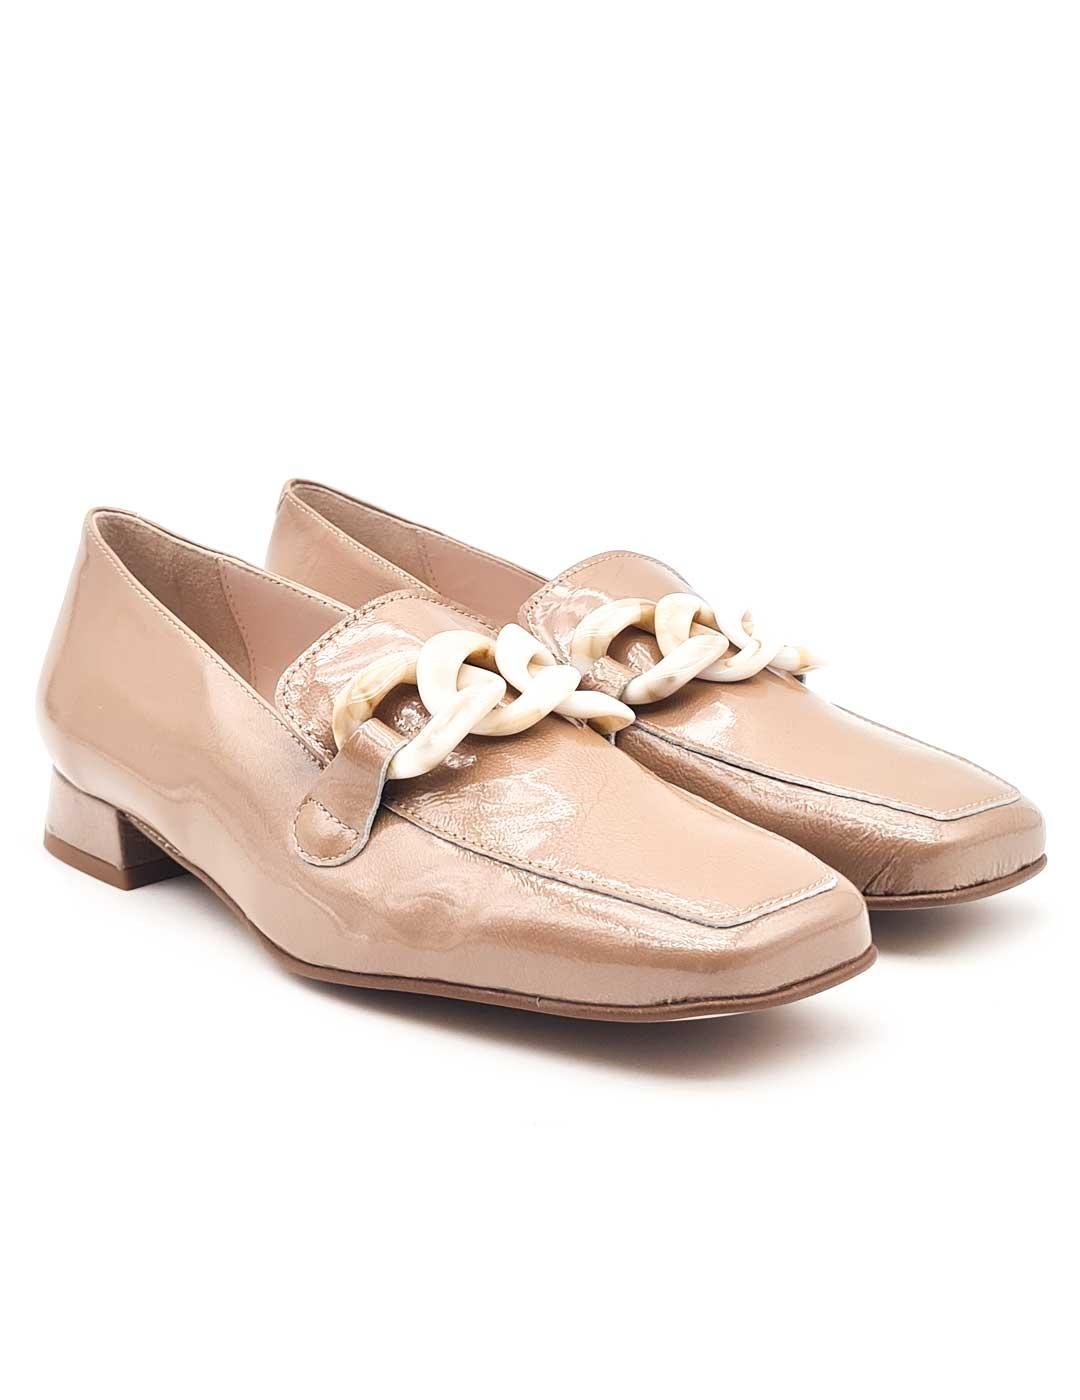  Jose Saenz taupe patent leather moccasins with elegant chain detail.